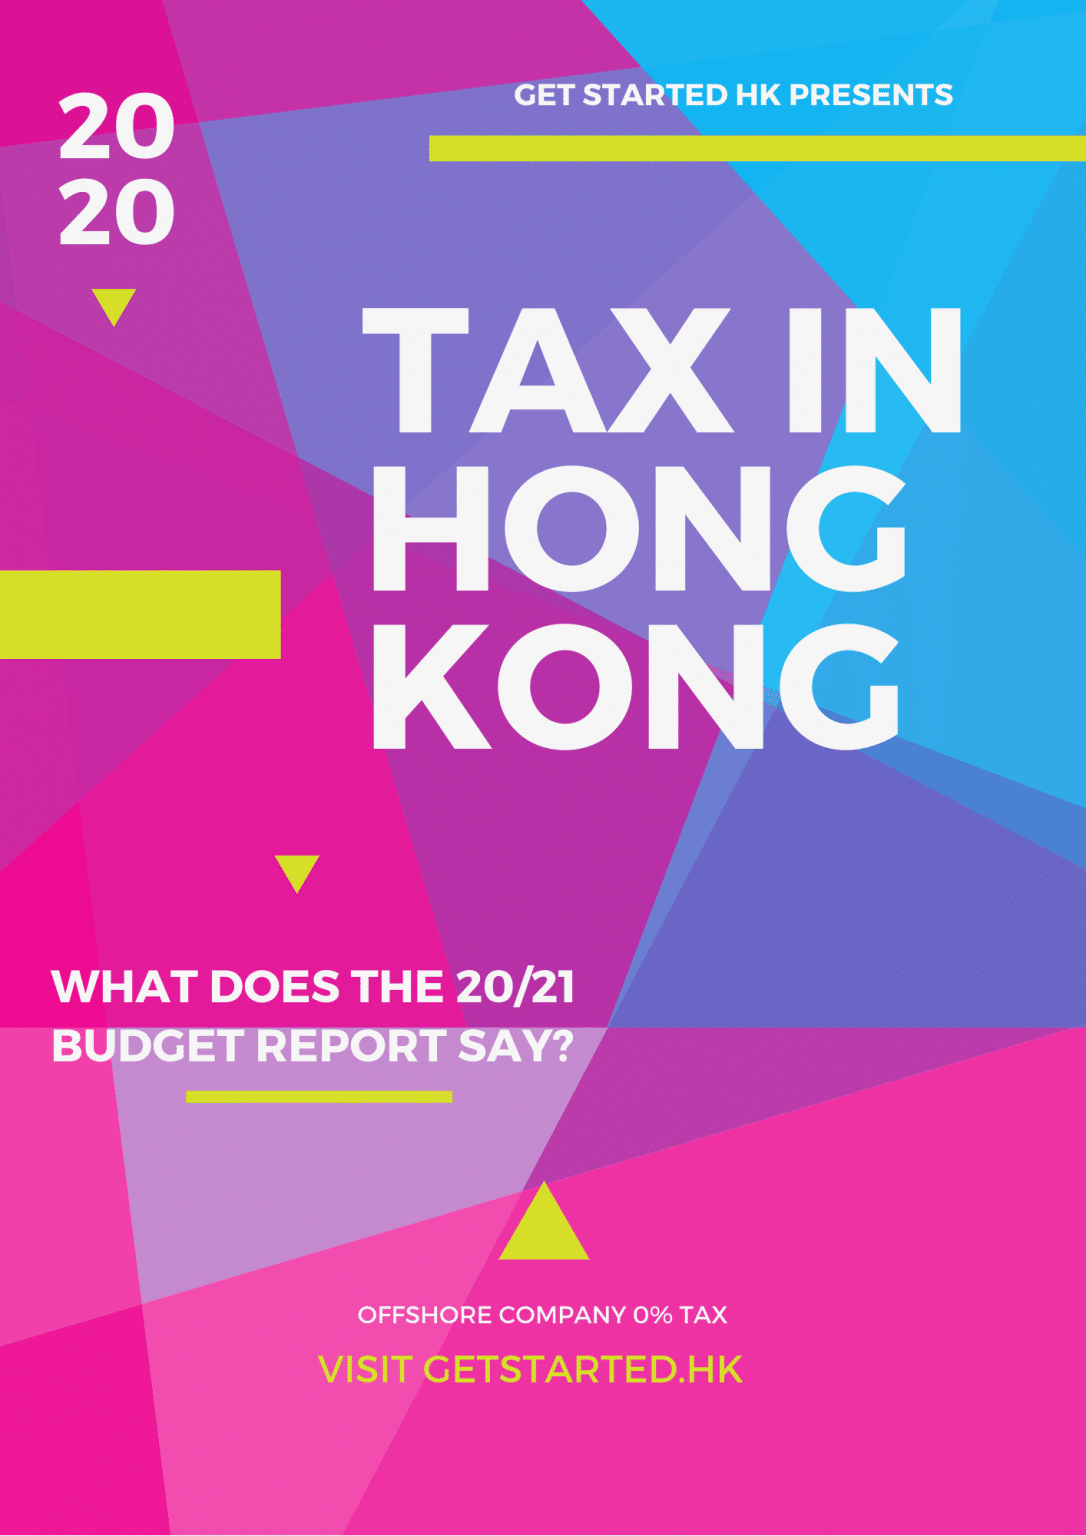 Corporate Tax Rate & Benefits in Hong Kong Get Started HK